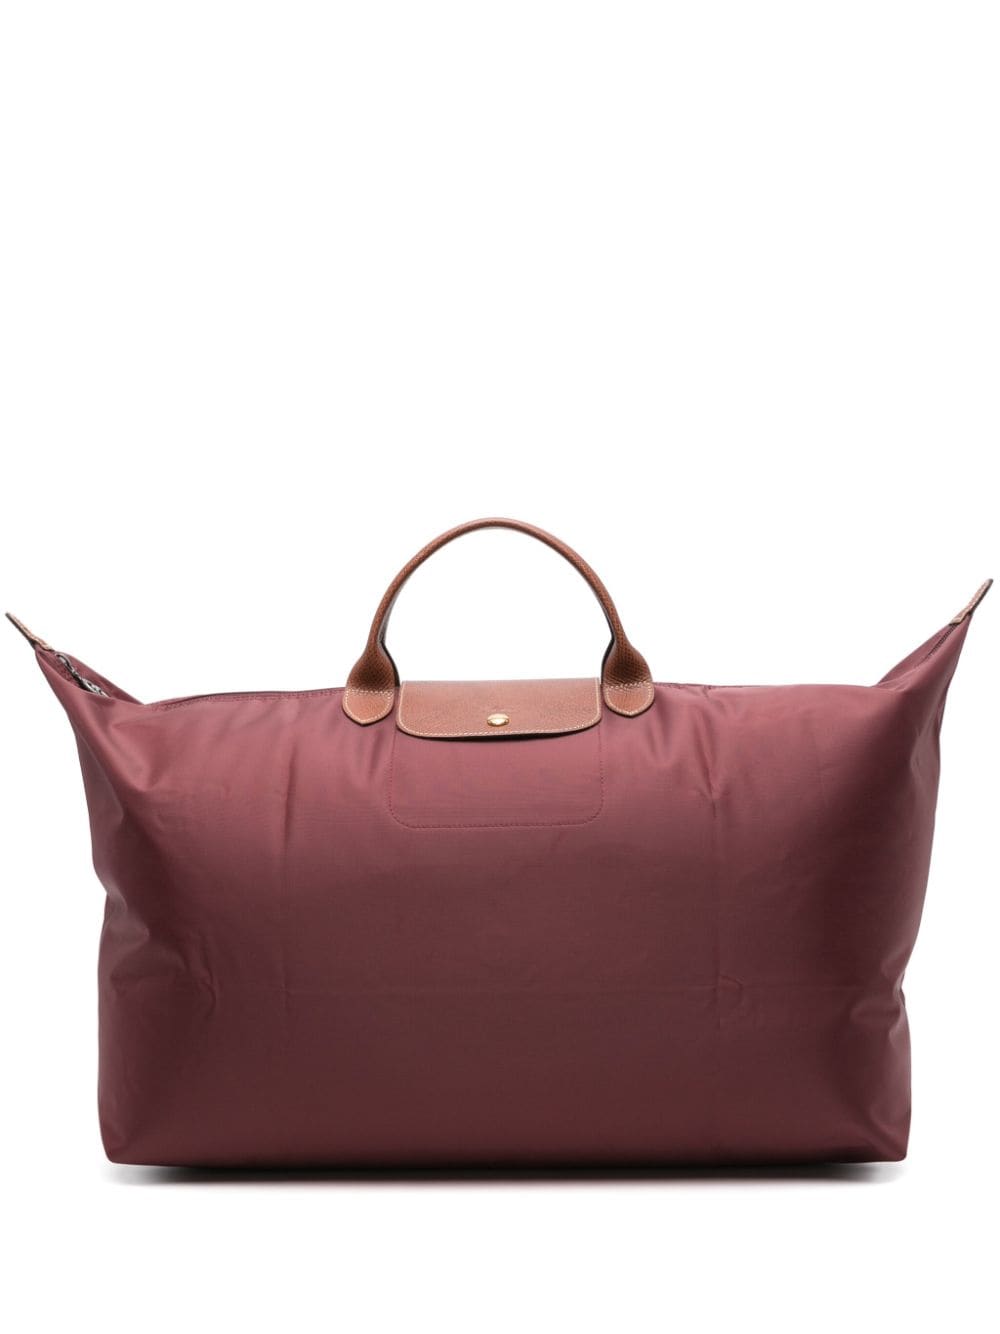 Longchamp Medium Le Pliage Holdall In Brown